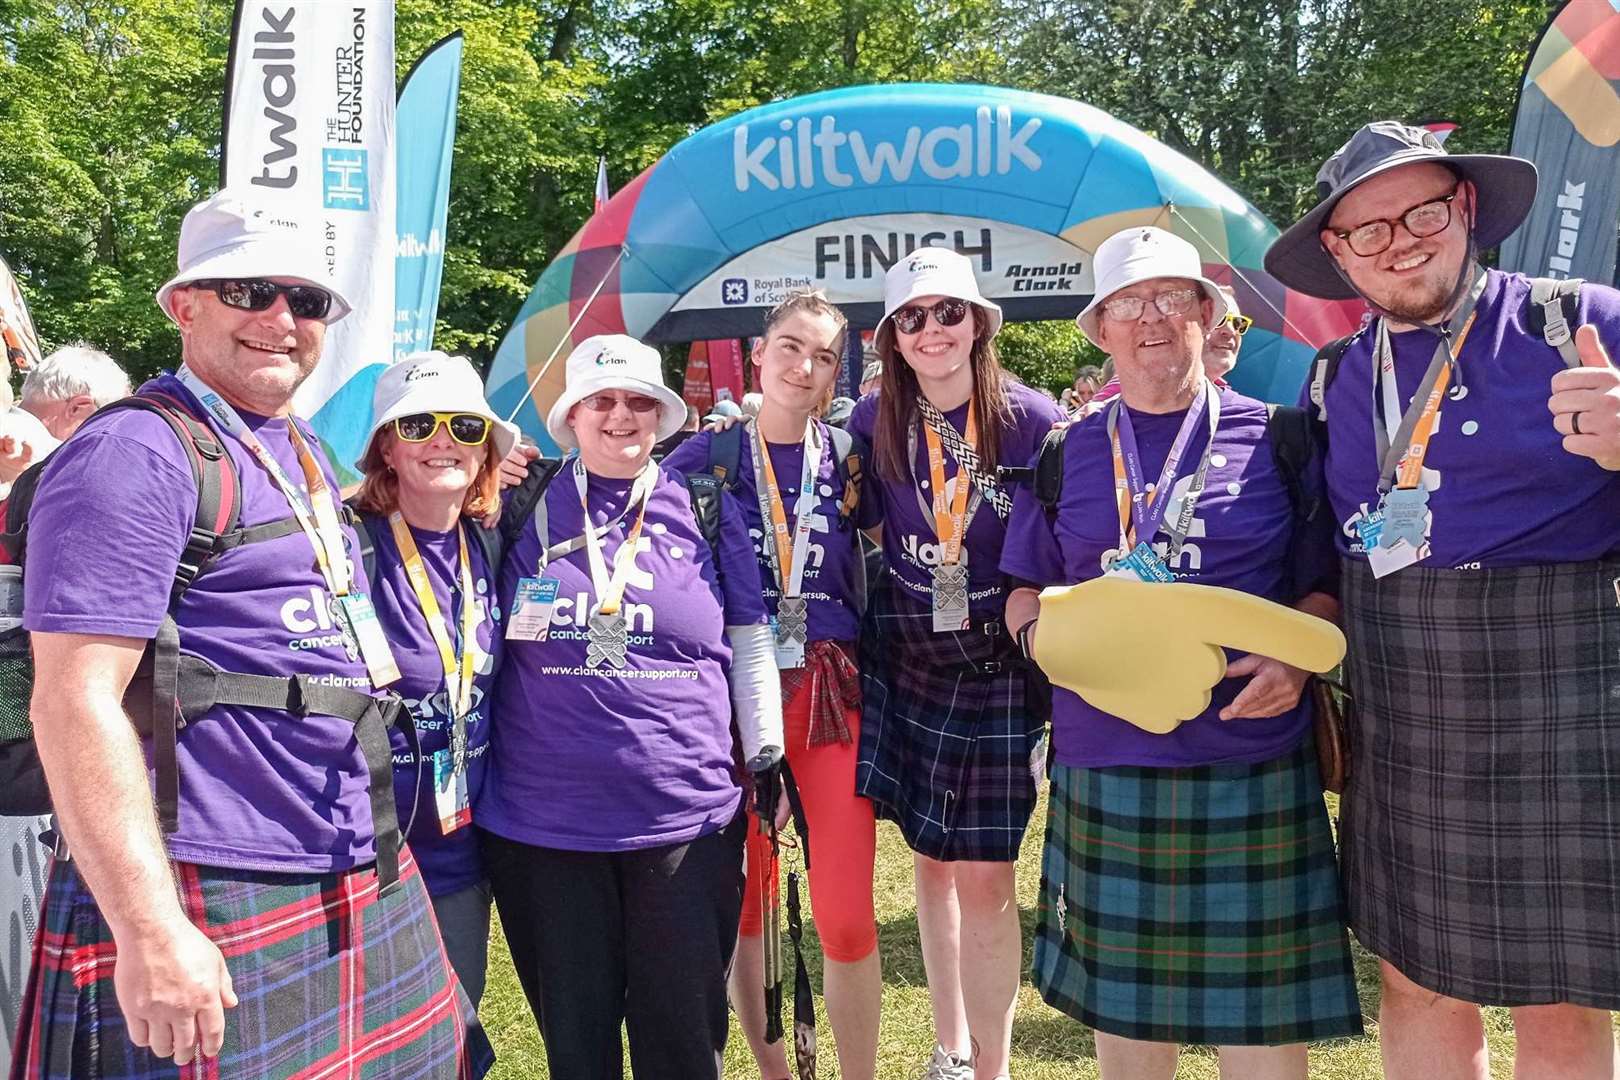 Dennis, pictured second from right, completed the Kiltwalk at the weekend.